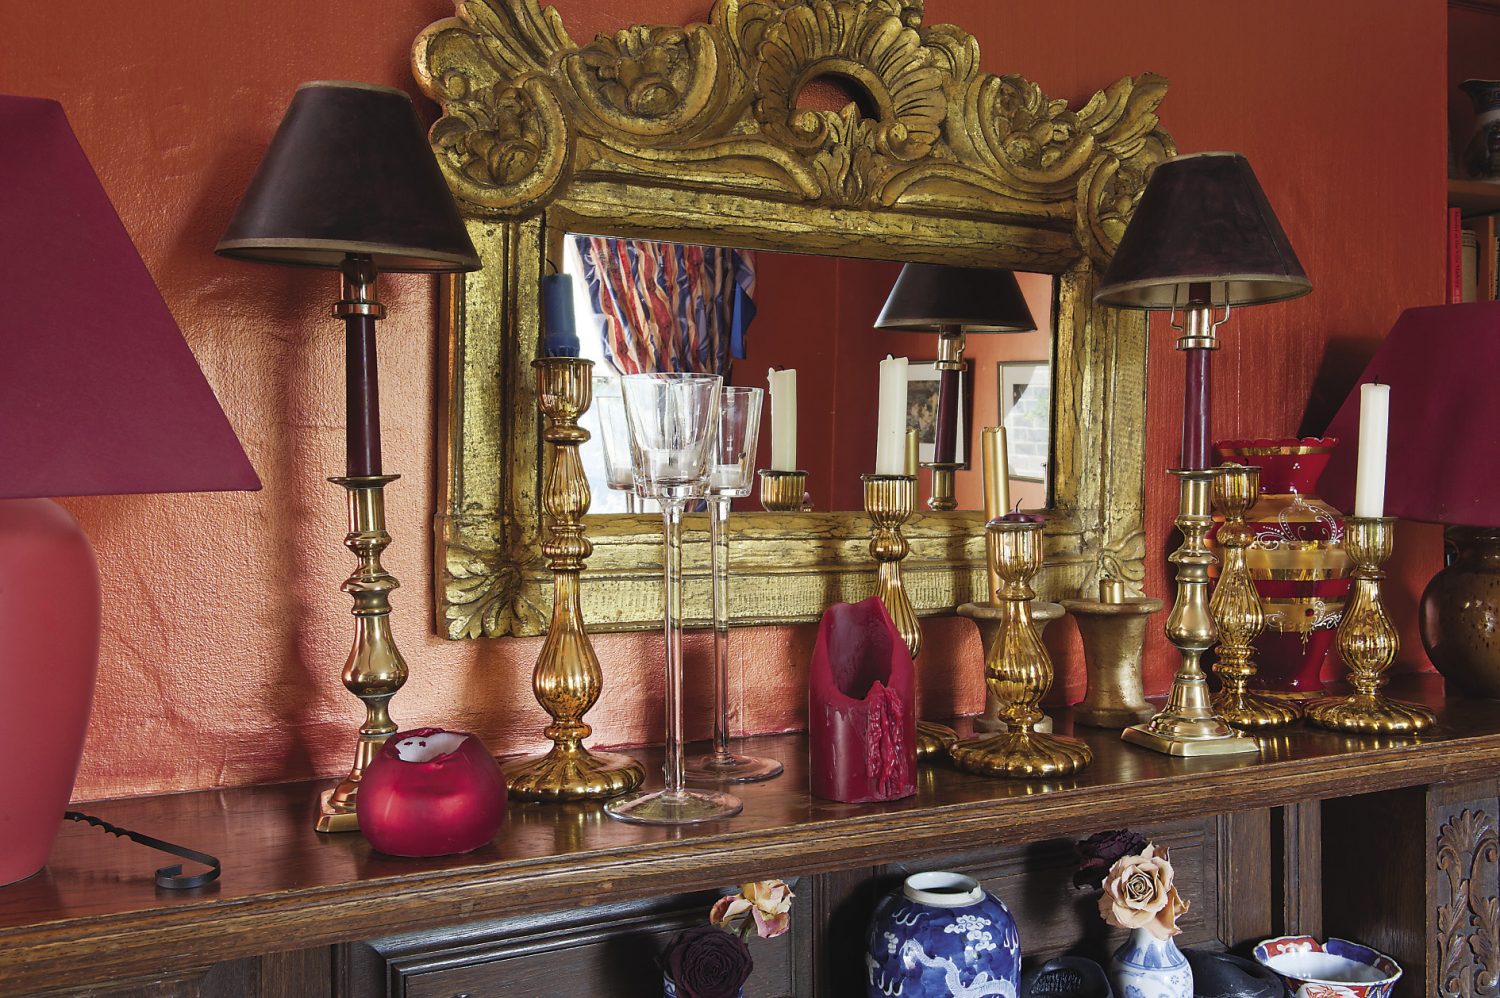 A collection of amber glass candlesticks lines the mantelpiece in the dining room